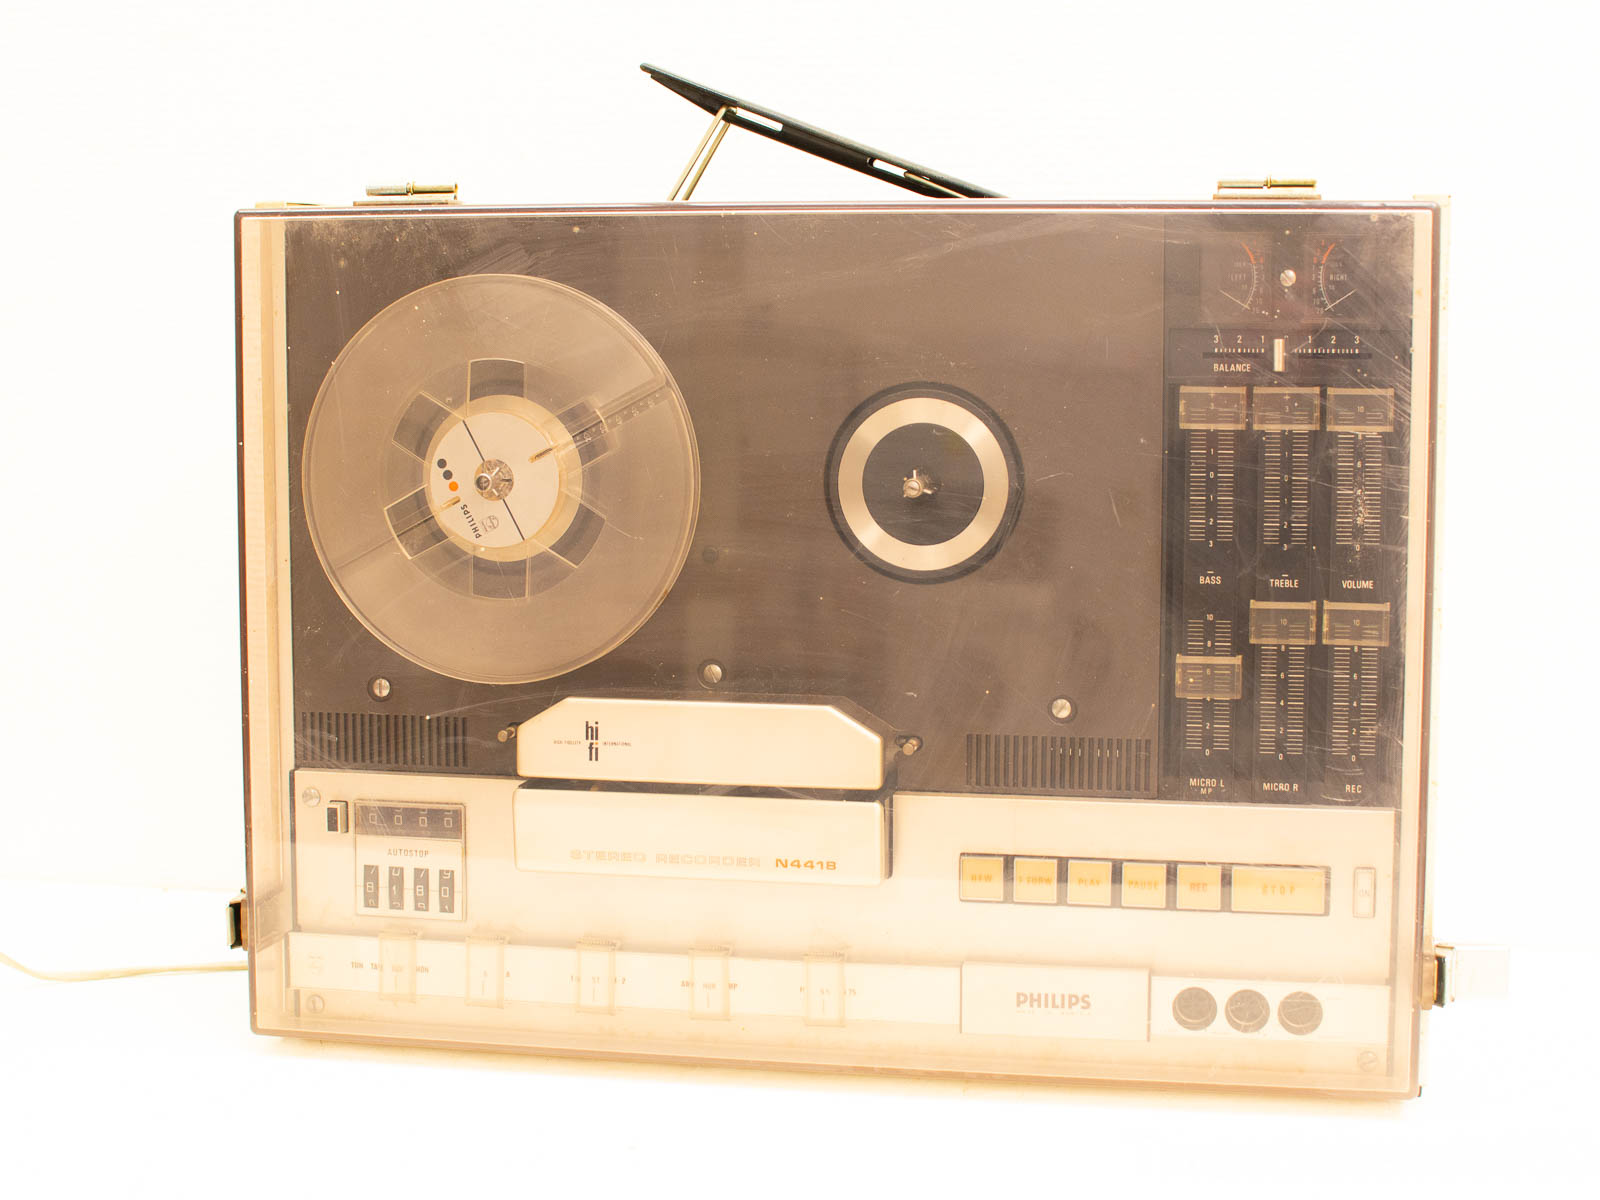 Philips stereo recorder n4418 31962